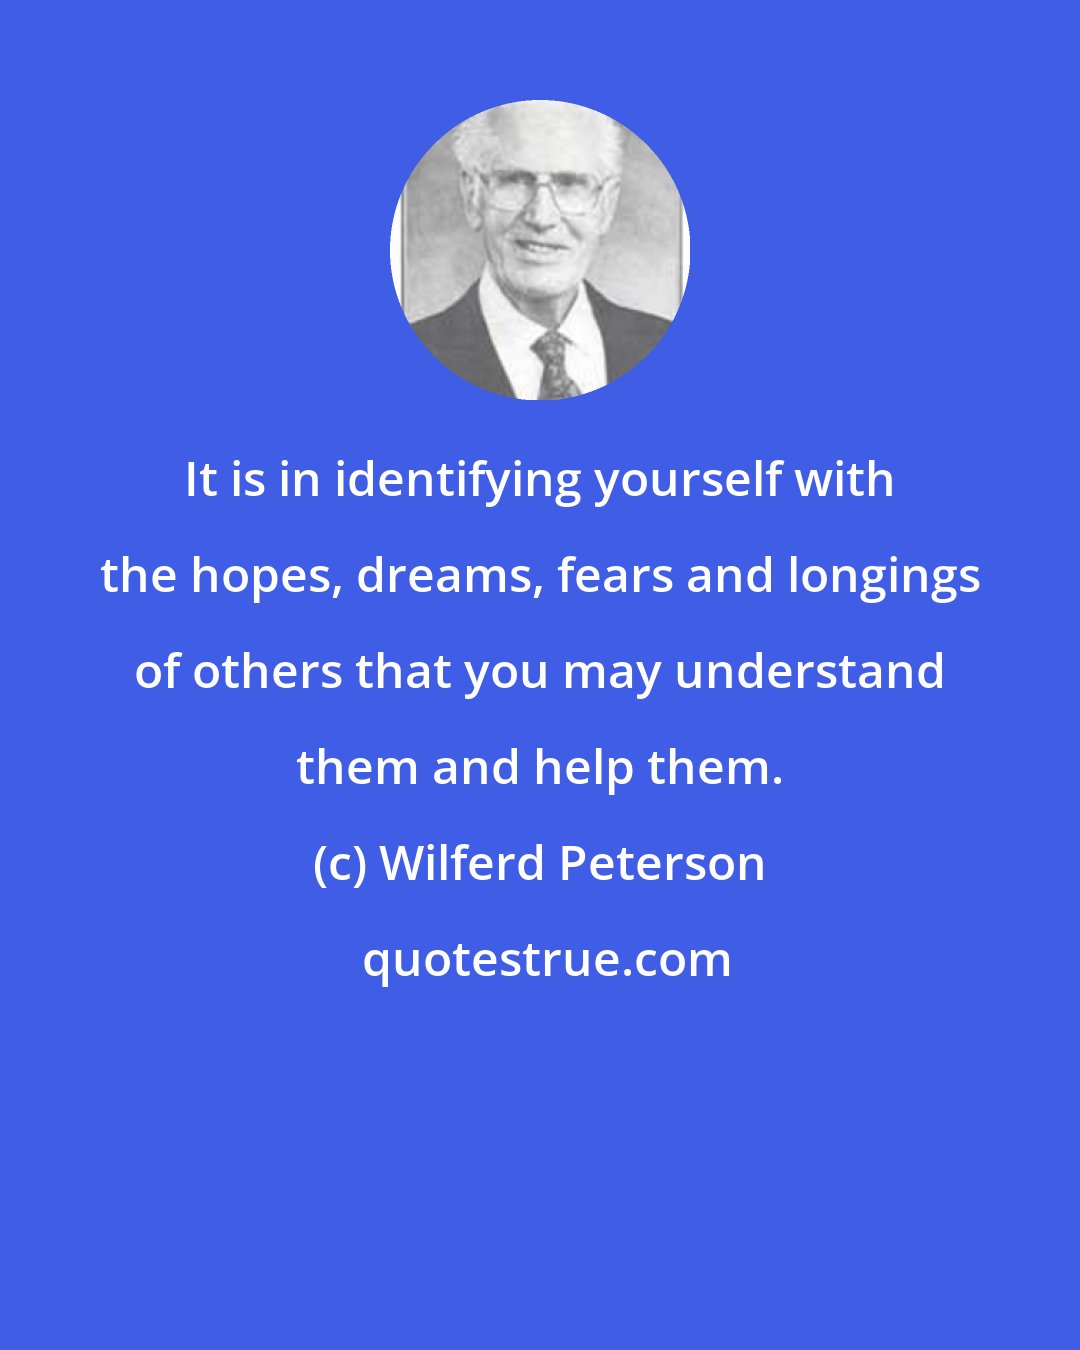 Wilferd Peterson: It is in identifying yourself with the hopes, dreams, fears and longings of others that you may understand them and help them.